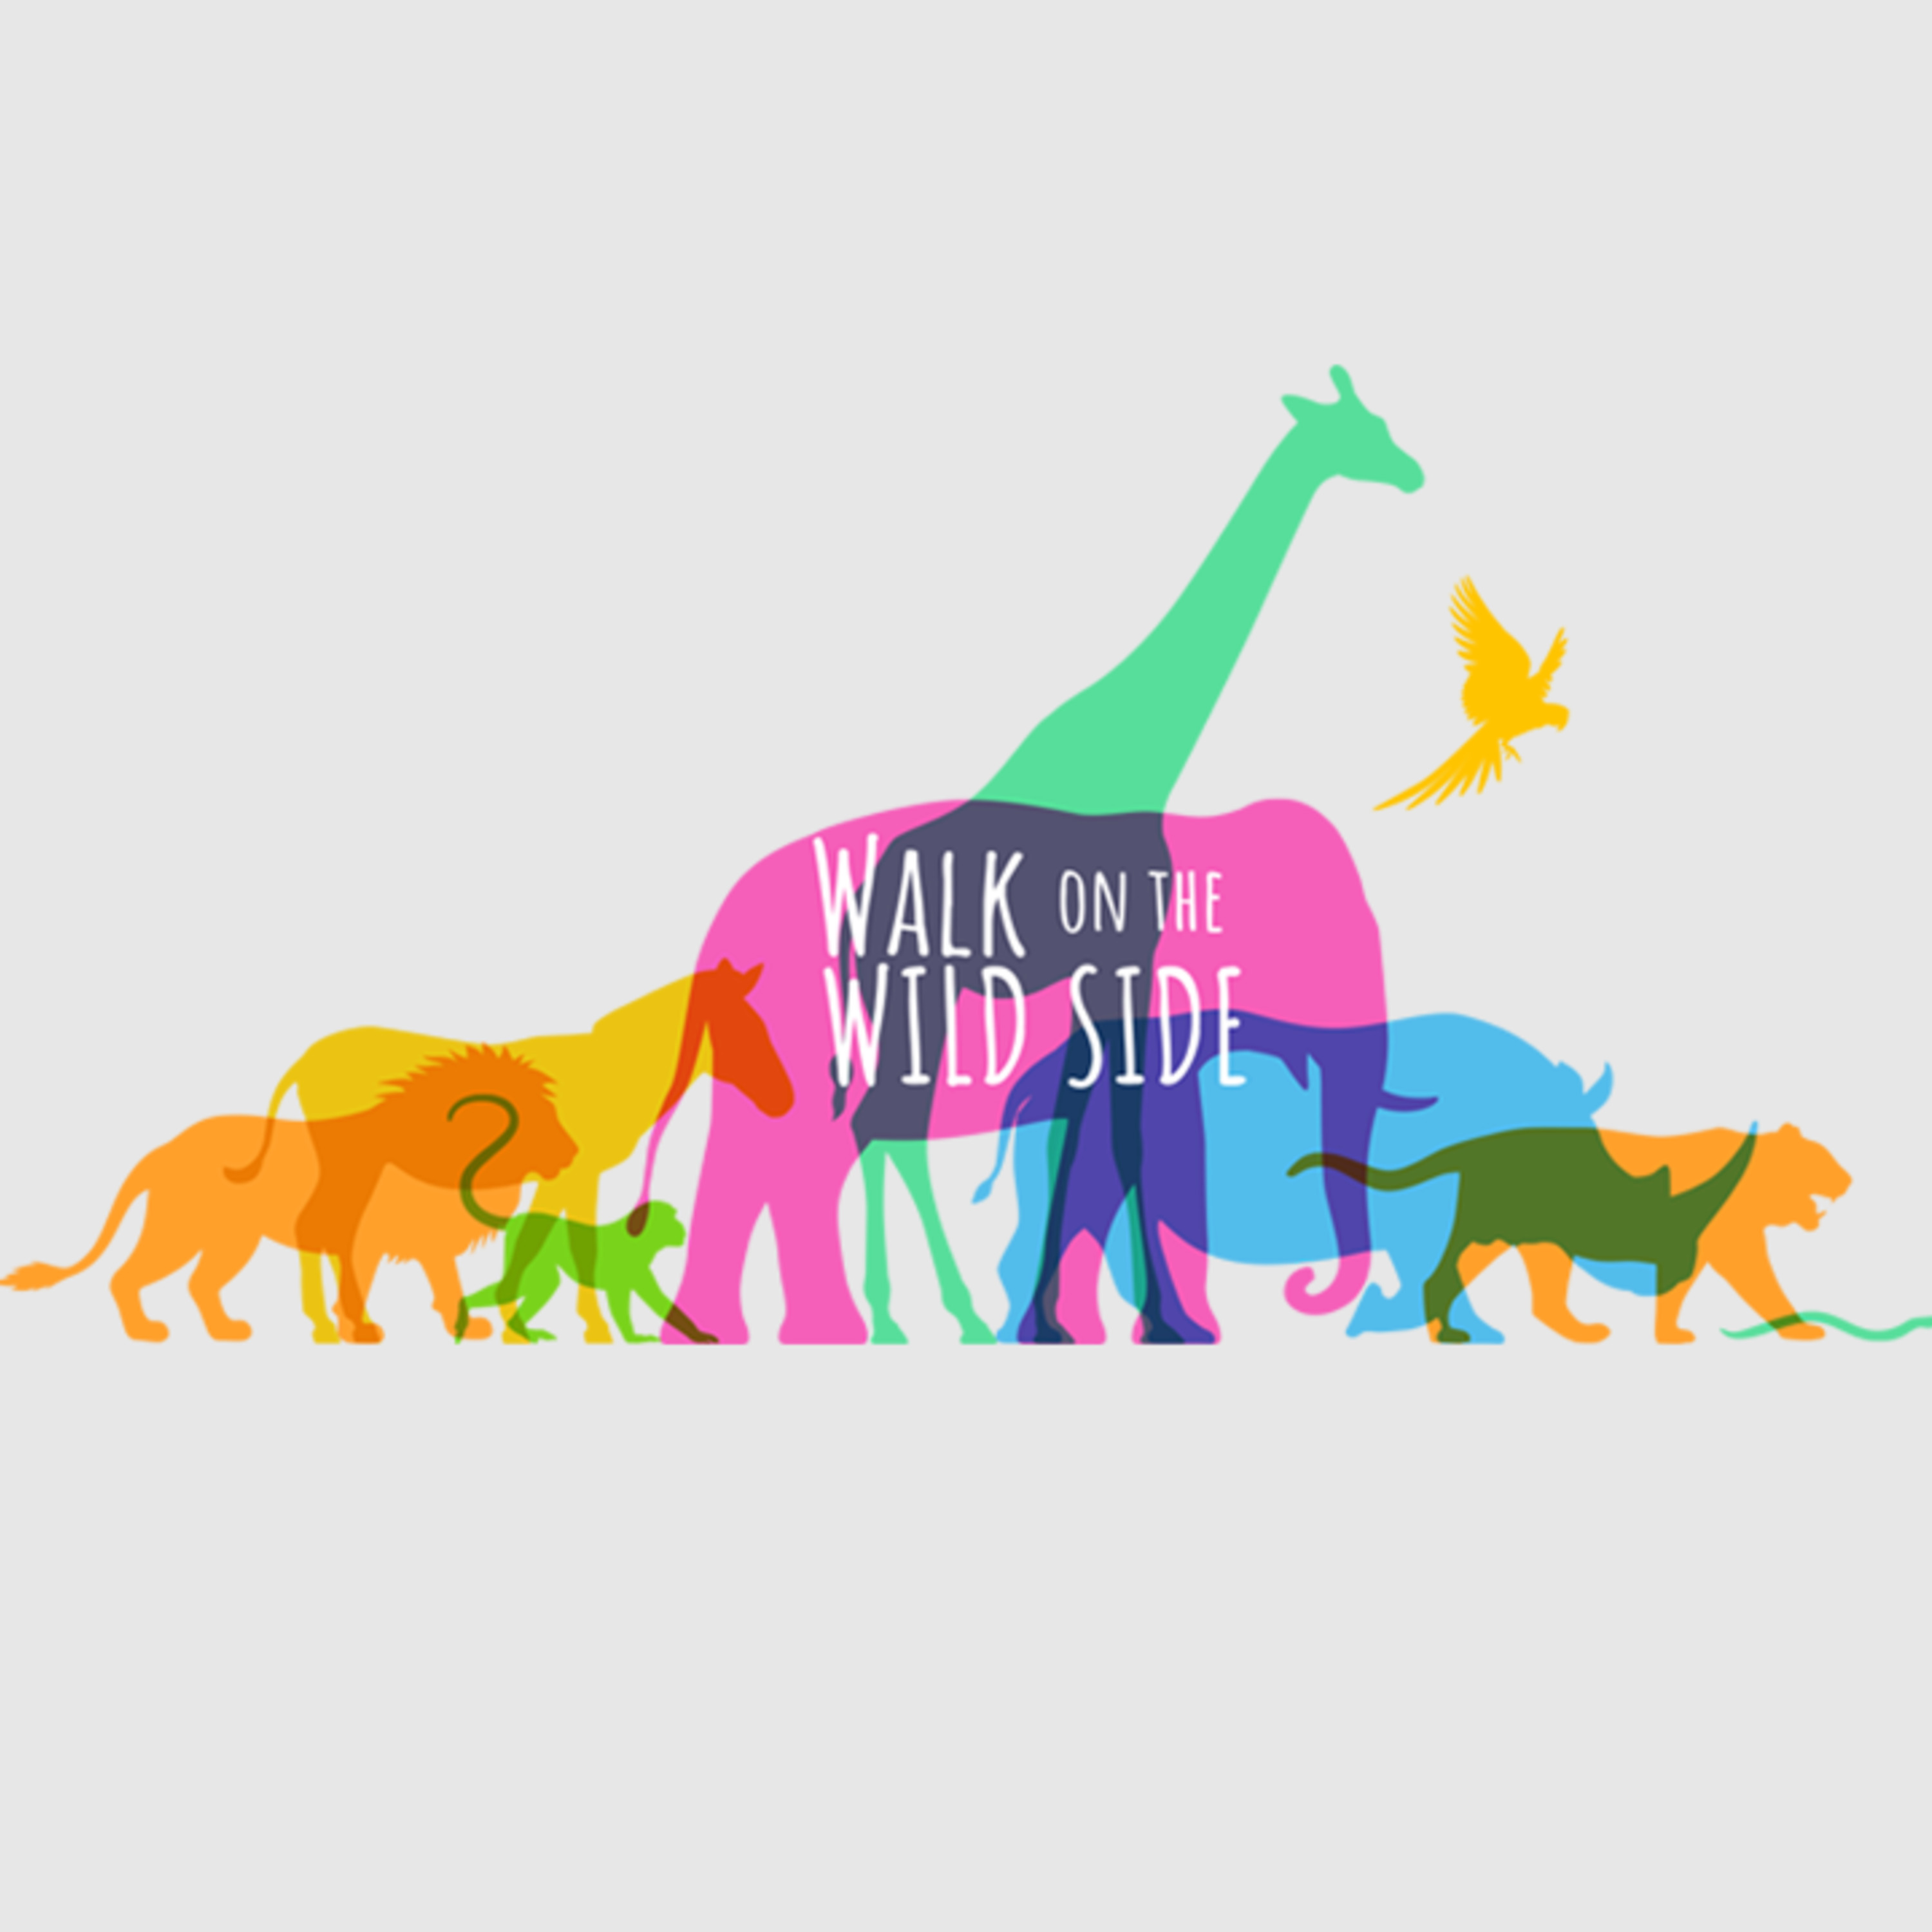 Episode 76: Walk on the Wild Side: Riding in Style | Sunday, August 2, 2020